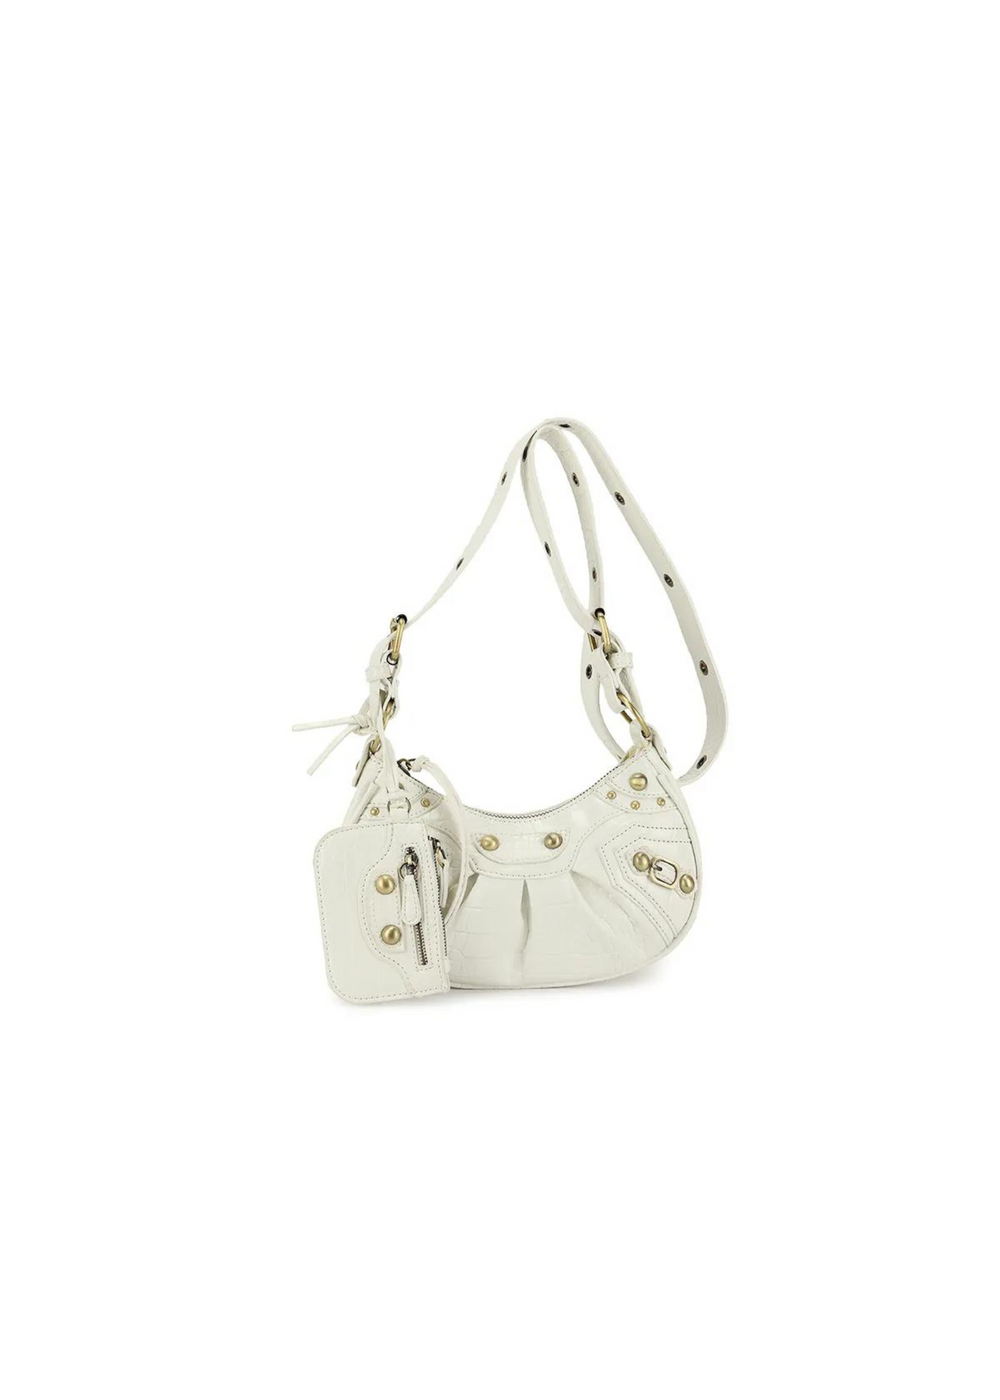 CHILLI DRAWSTRING BUCKET BAG WITH TASSEL DETAIL IN WHITE FAUX LEATHER